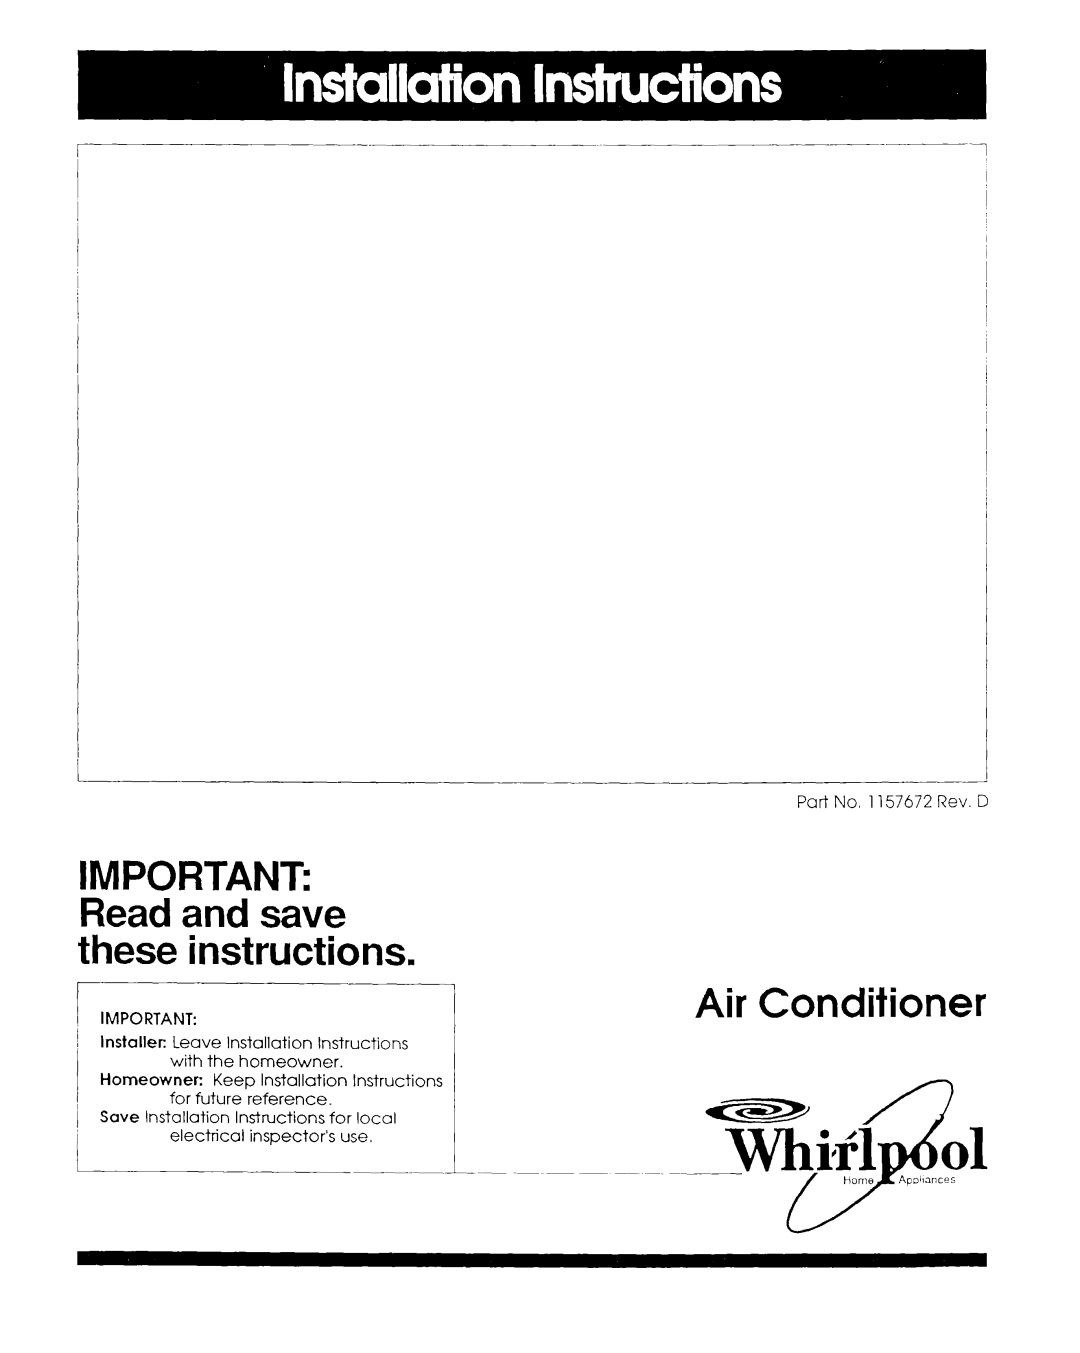 Whirlpool 1157672 installation instructions IMPORTANT Read and save these instructions, Air Conditioner 